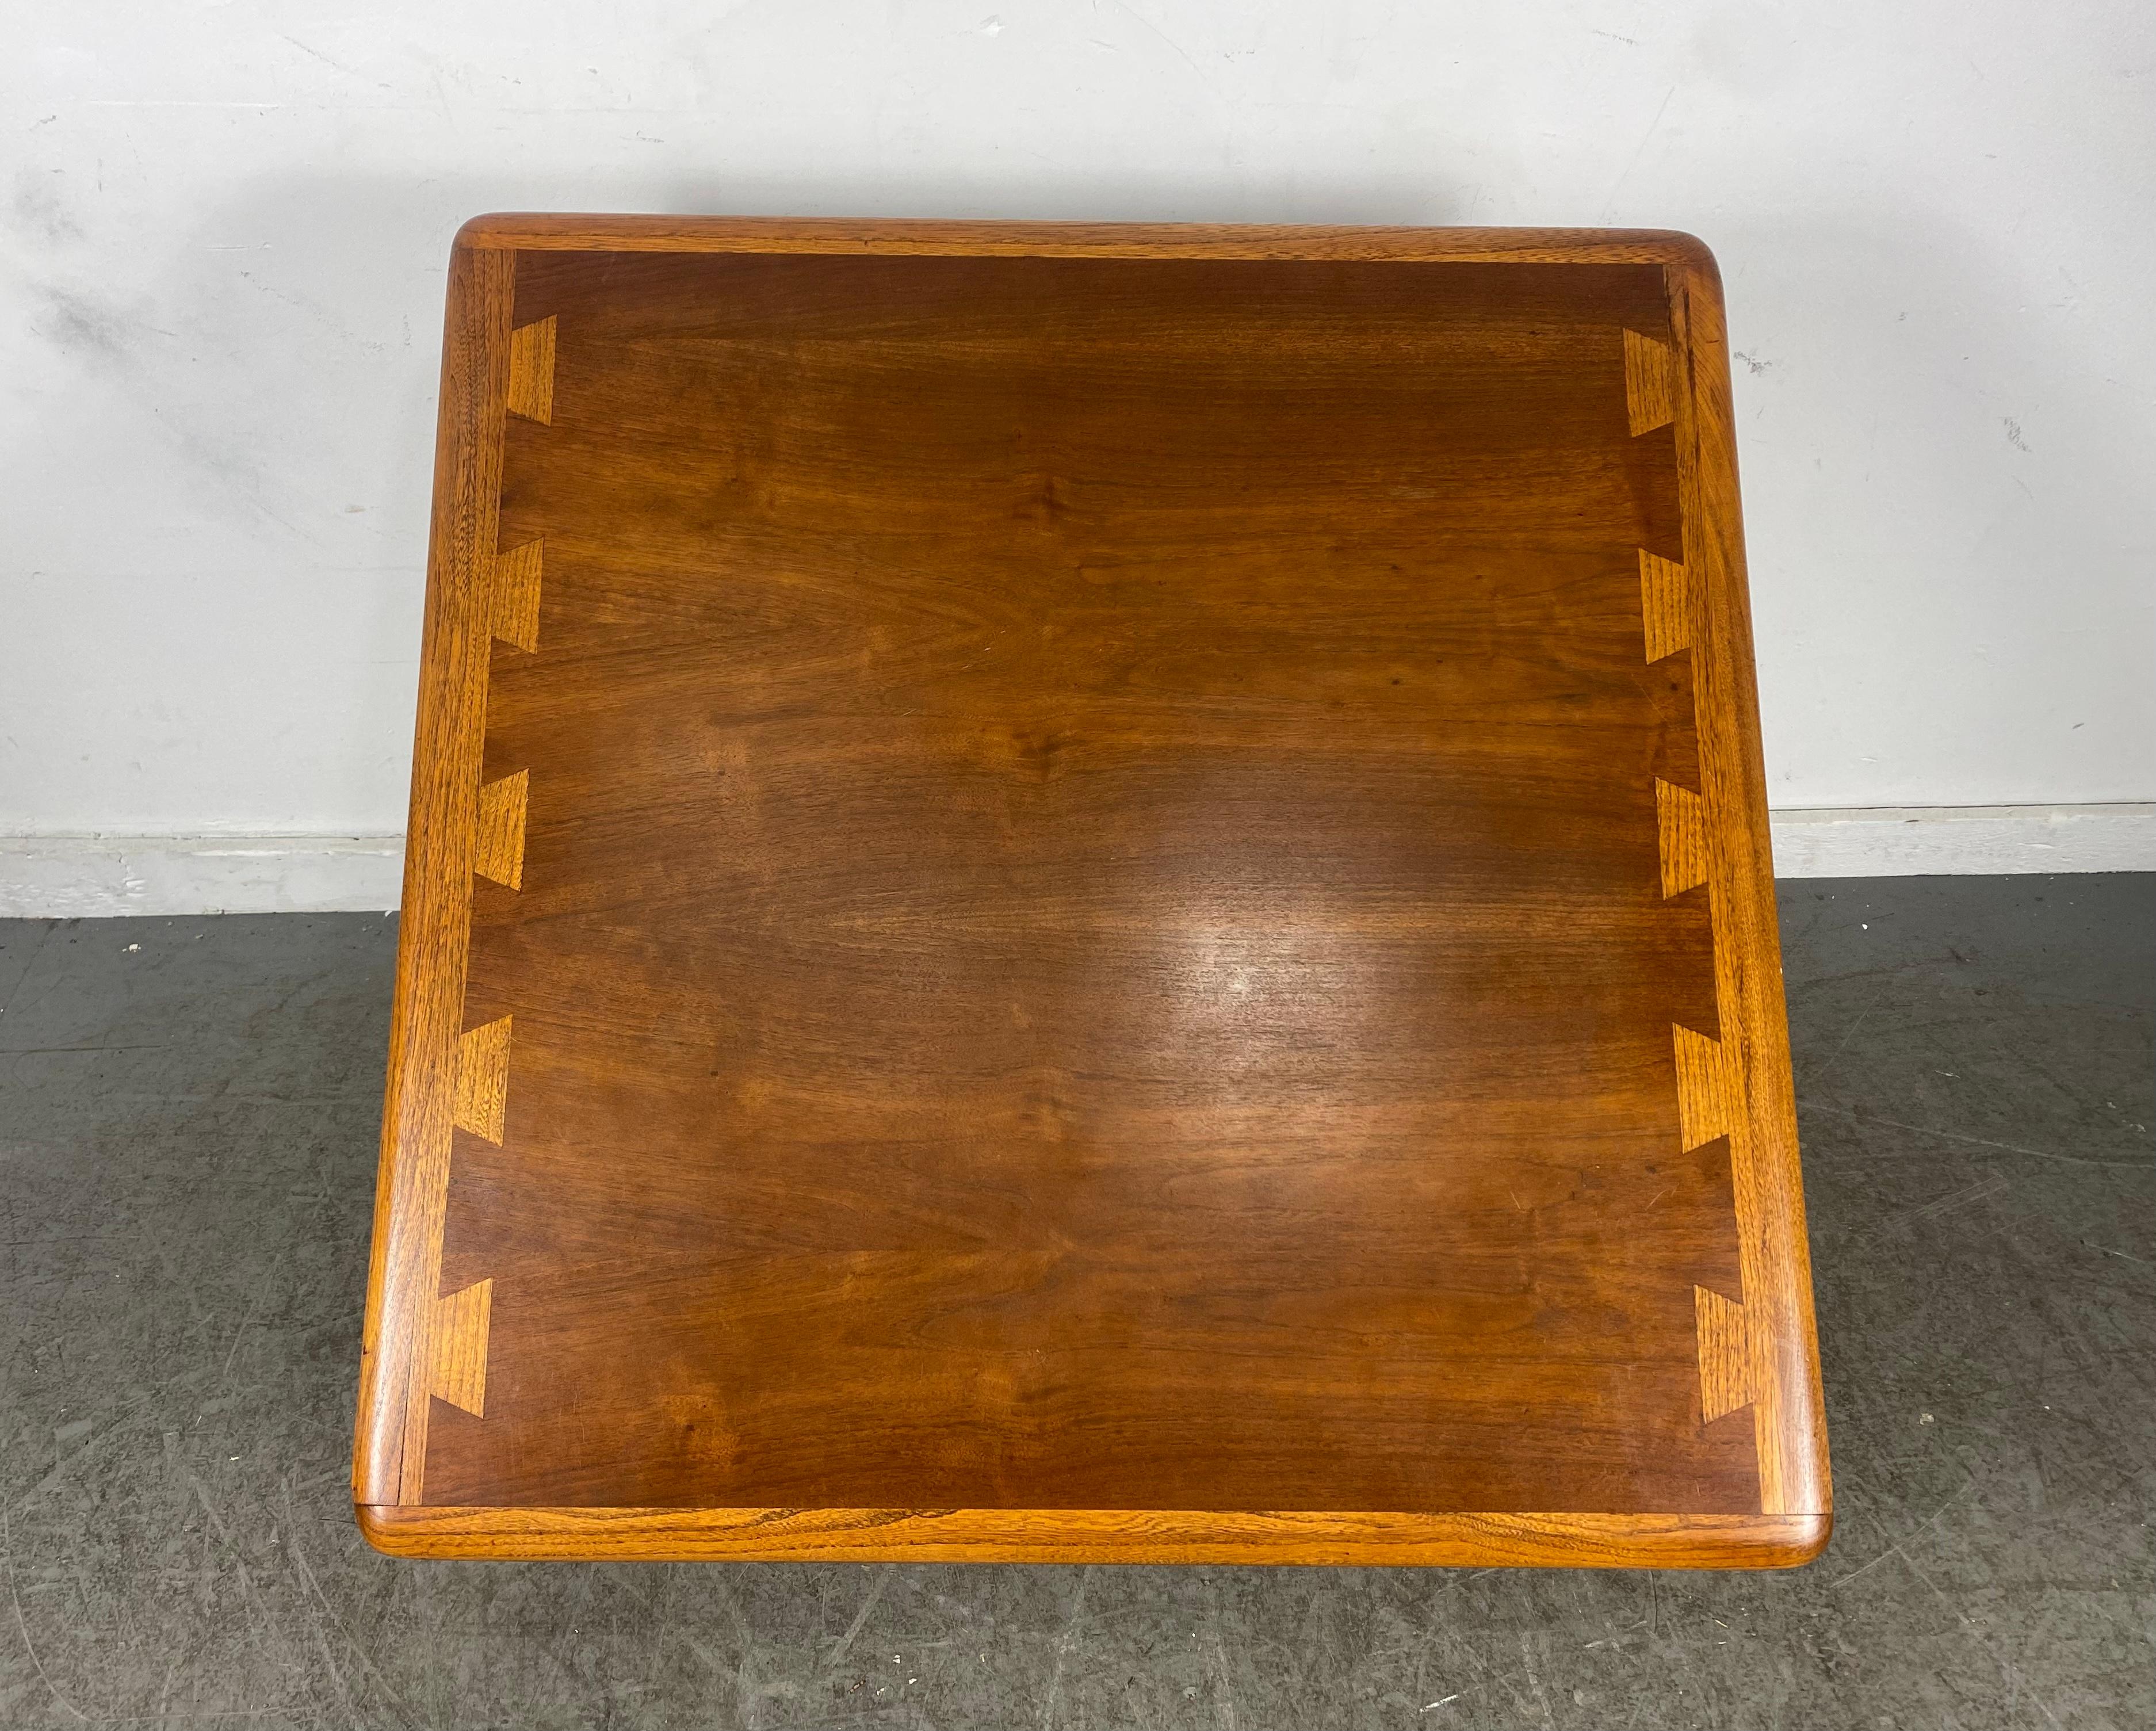 Classic mid century lane acclaim square walnut and oak dovetail coffee table. Professionally restored. Beautiful color / patina. Fit seamlessly into any modern, contemporary , eclectic environment. Hand delivery avail to New York City or anywhere